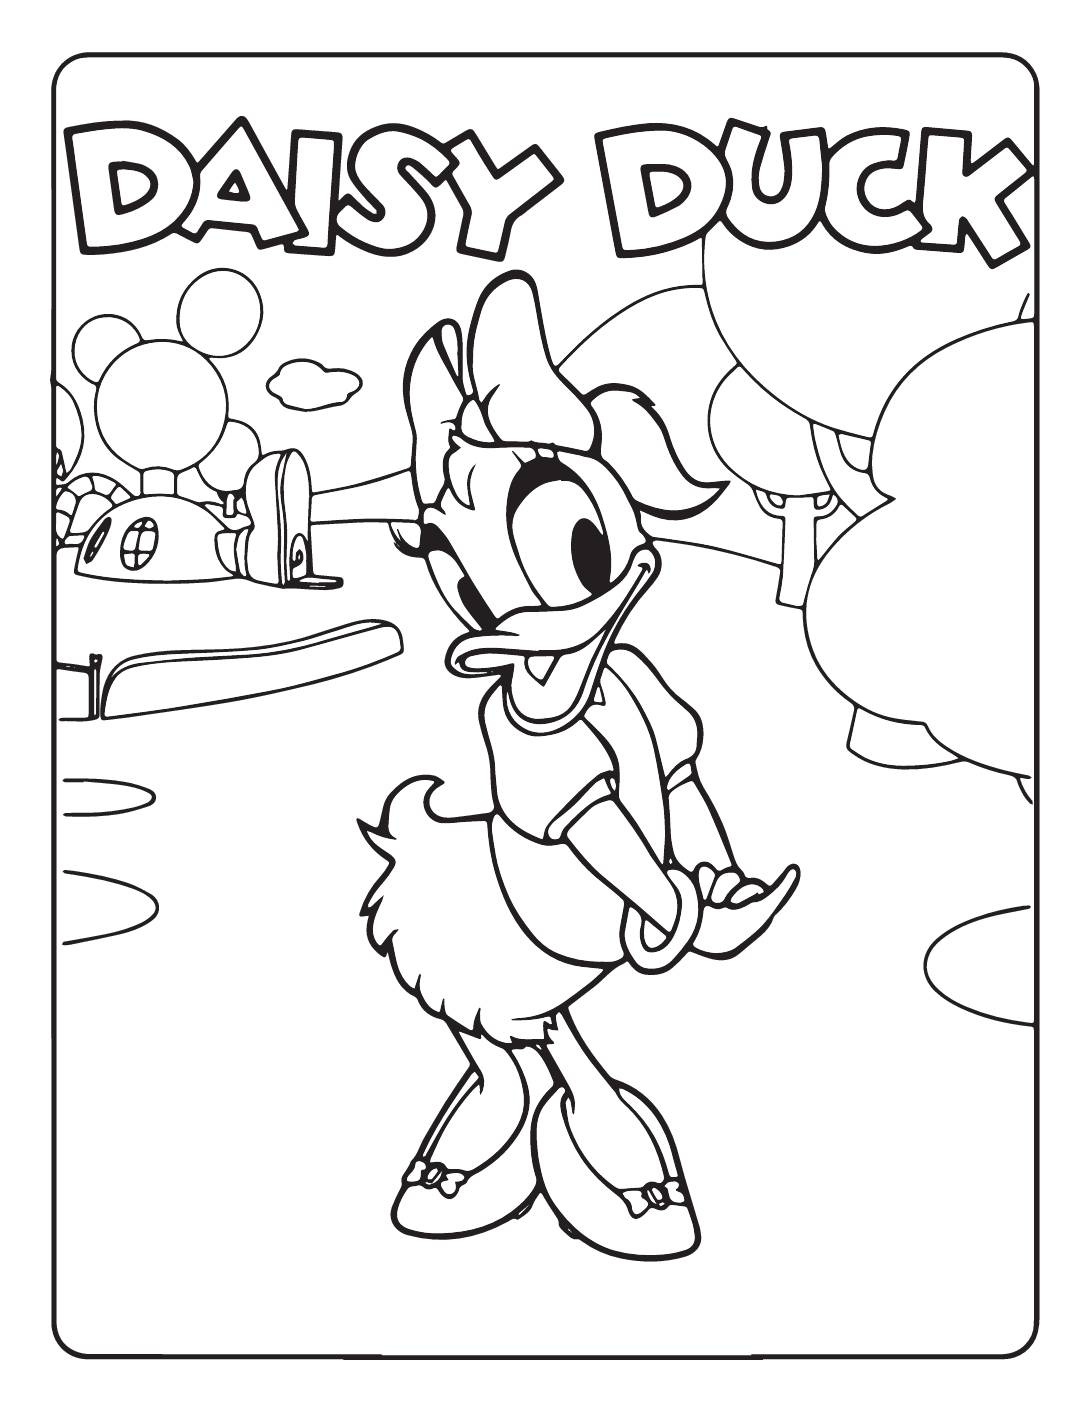 Daisy Duck Coloring Page Coloring Pages